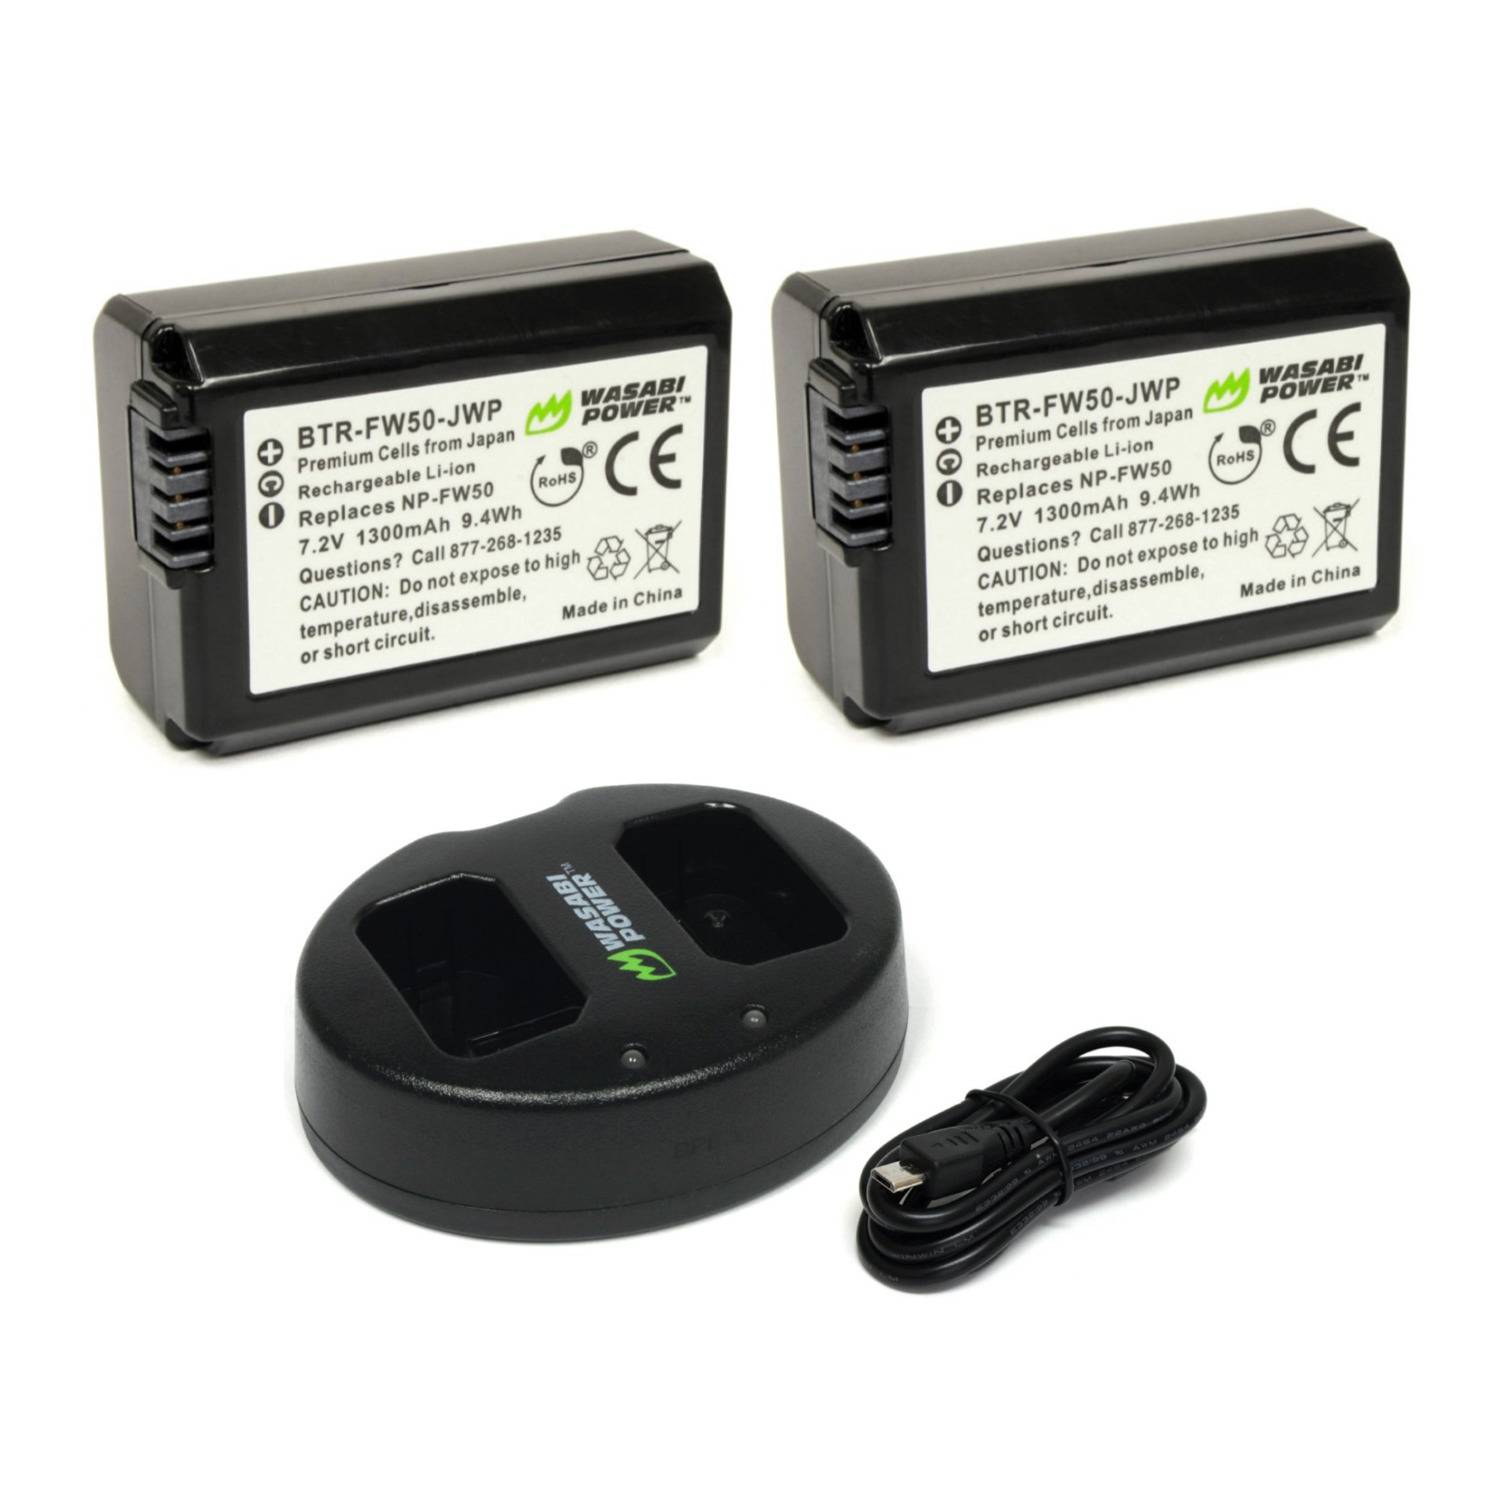 Wasabi Power Battery (2-Pack) and Dual Charger Kit for Sony NP-FW50 Batteries